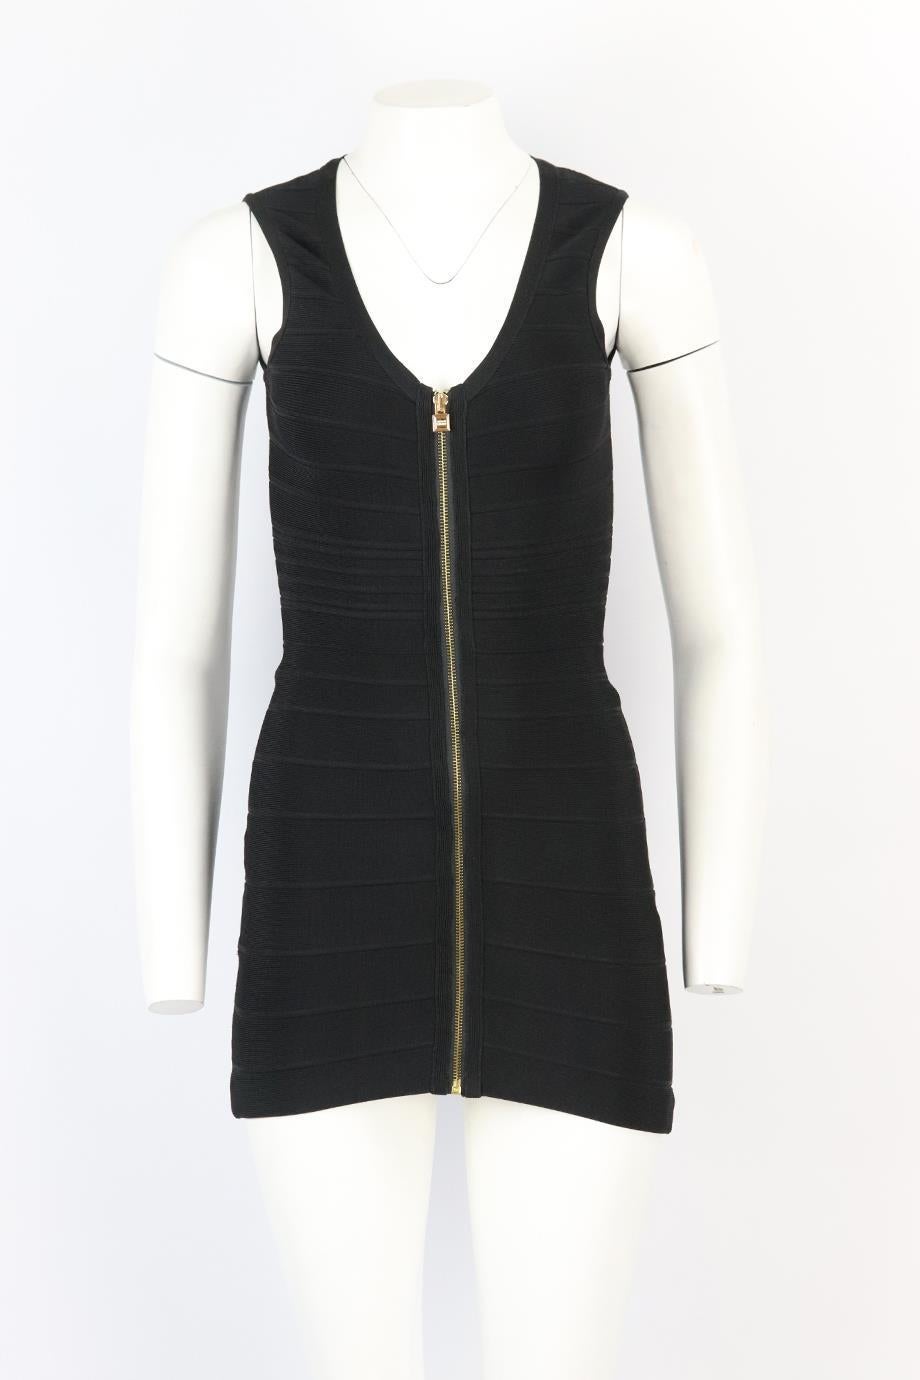 Herve Leger bandage mini dress. Black. Sleeveless, v-neck. Zip fastening at front. Size: XSmall (UK 6, US 2, FR 34, IT 38). Bust: 30 in. Waist: 21 in. Hips: 30 in. Length: 30 in. Very good condition - Composition label cut out for comfort. Light